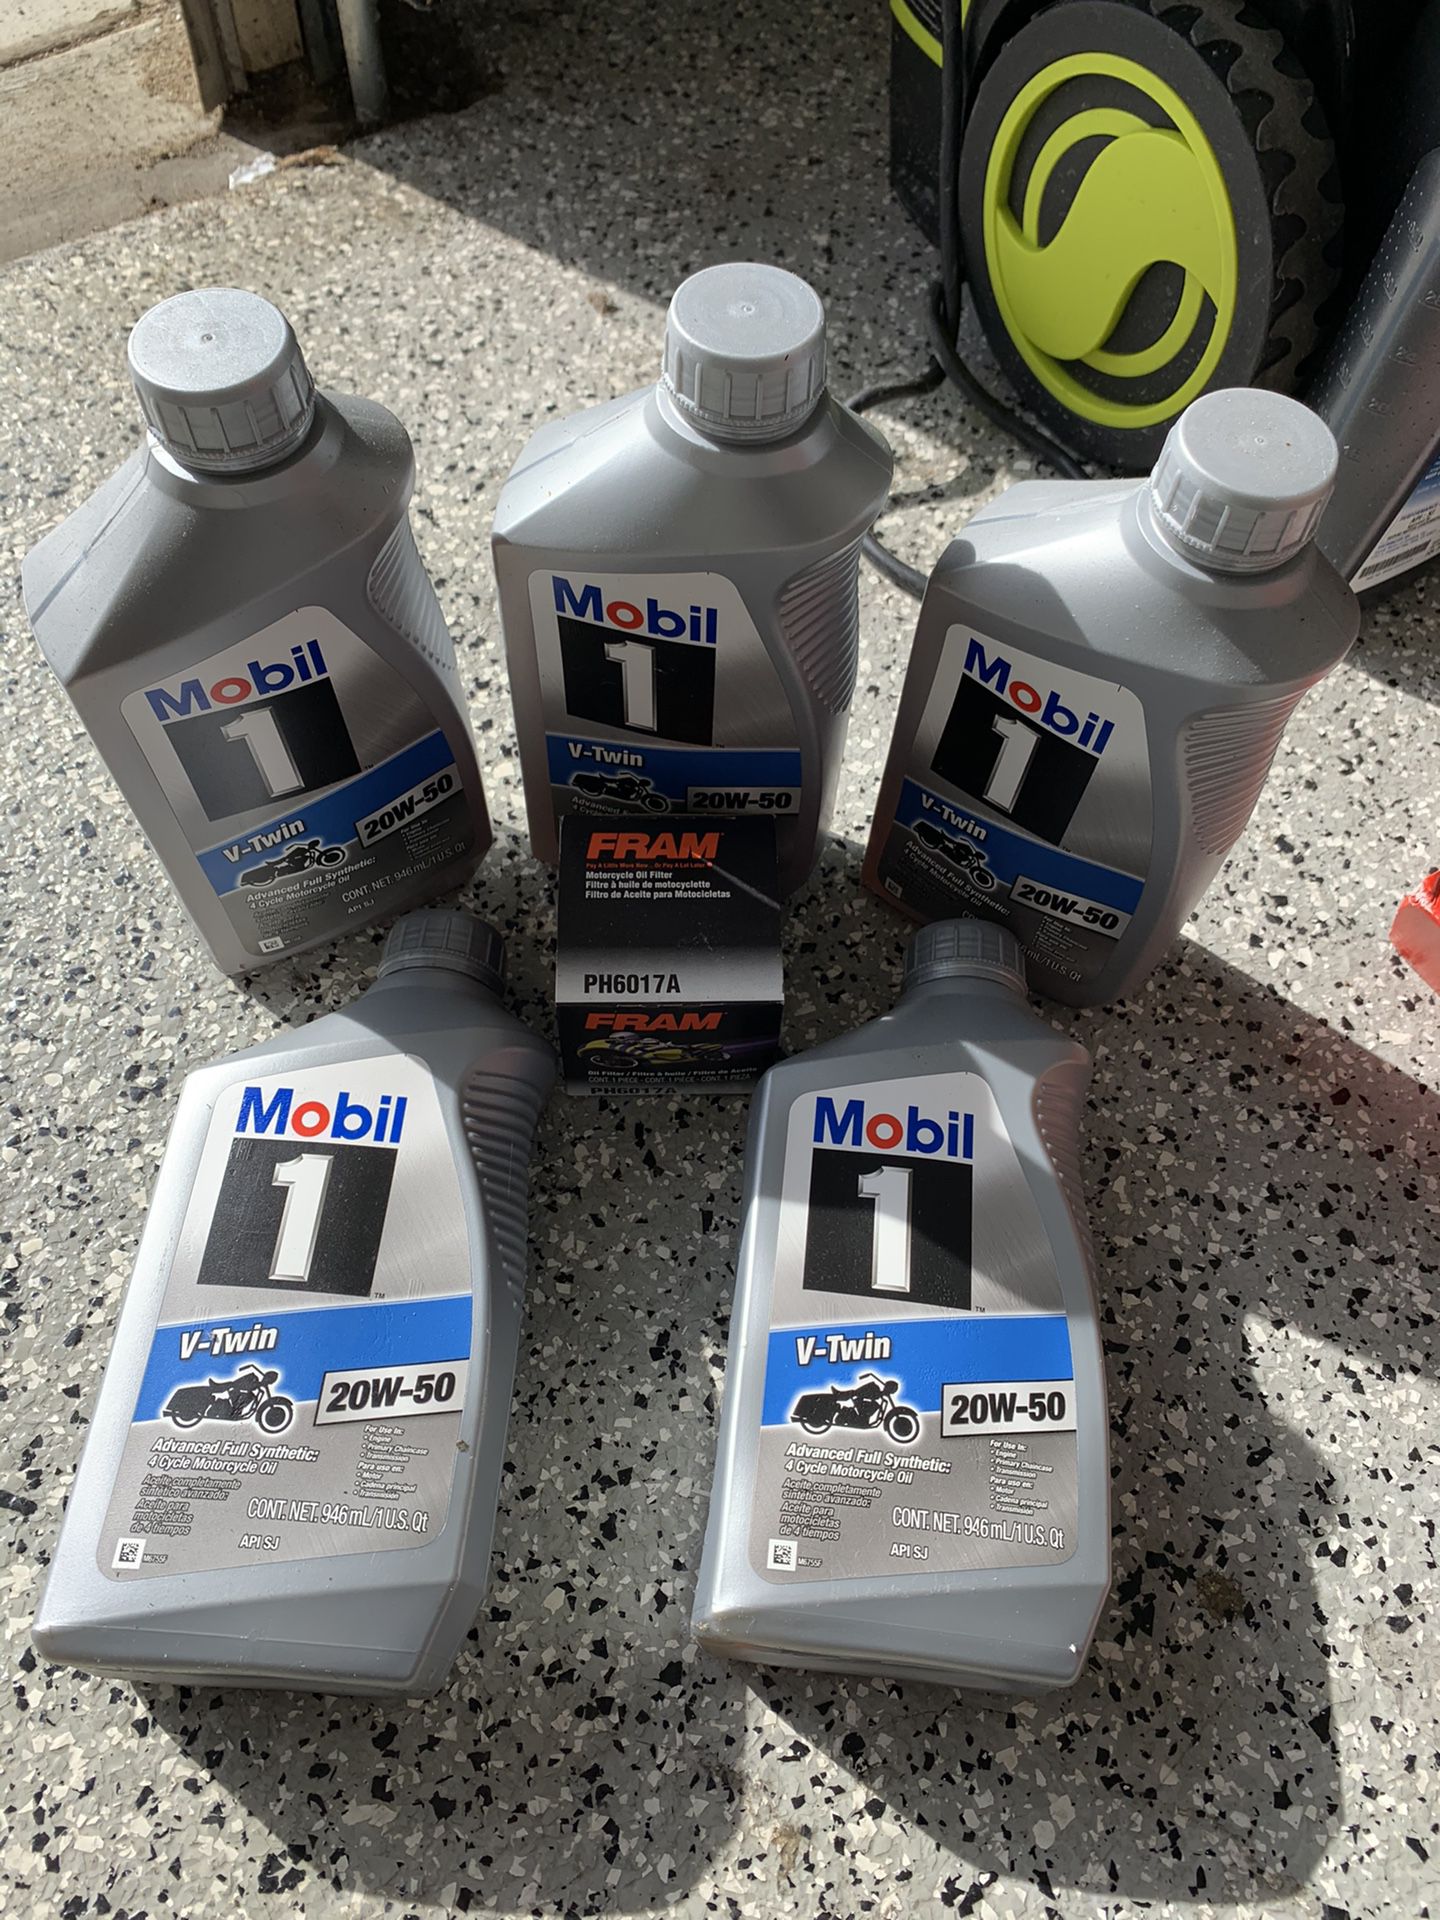 Mobil One V-twin Motorcycle Oil